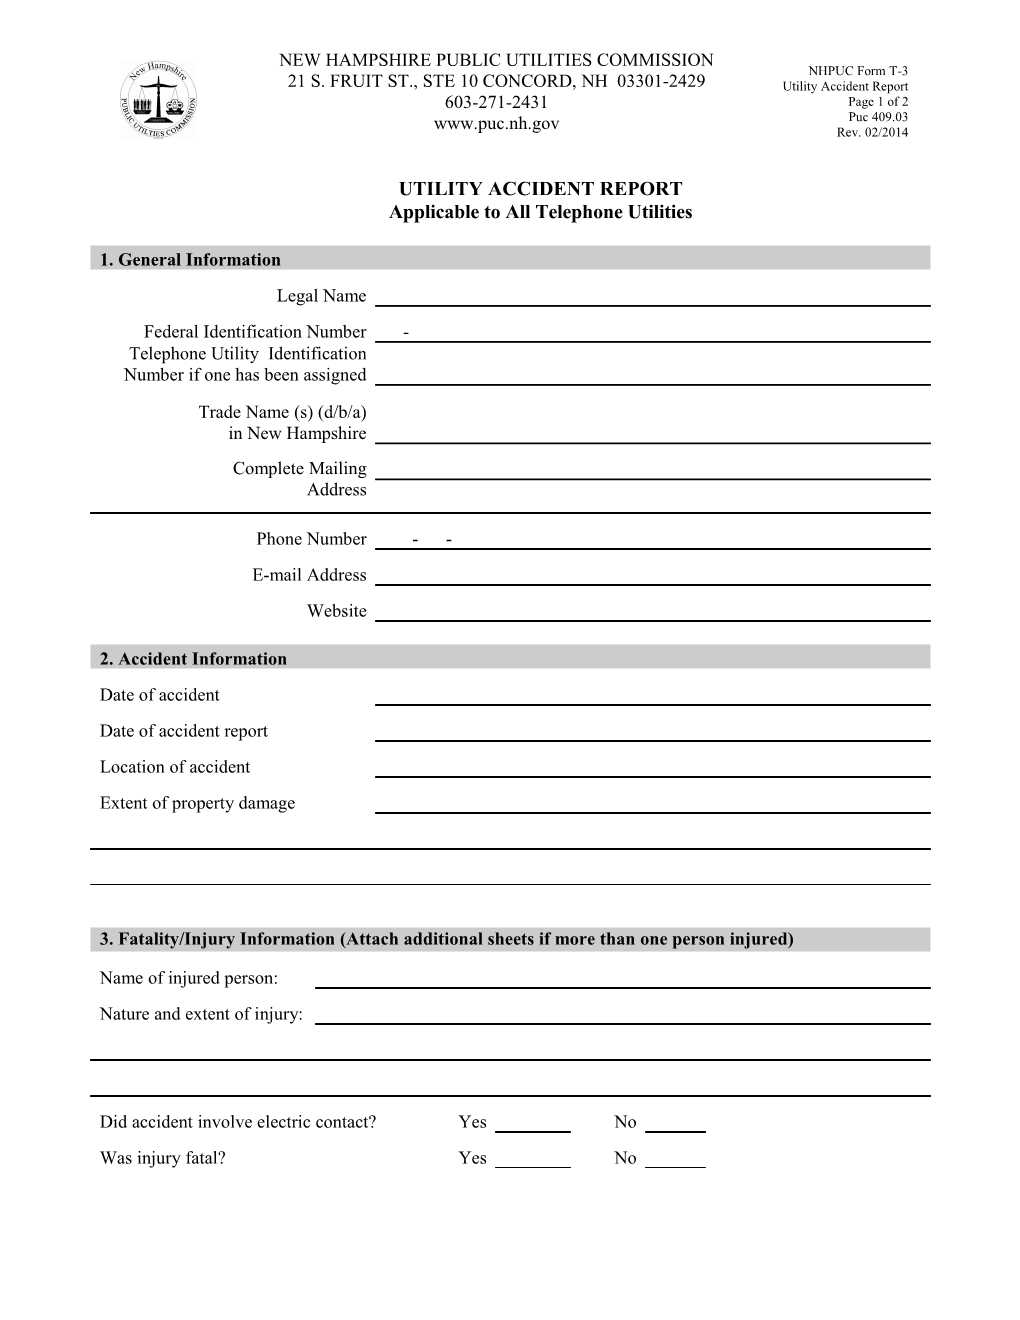 NHPUC Electric and Telephone Accident Reporting Form (E-5)